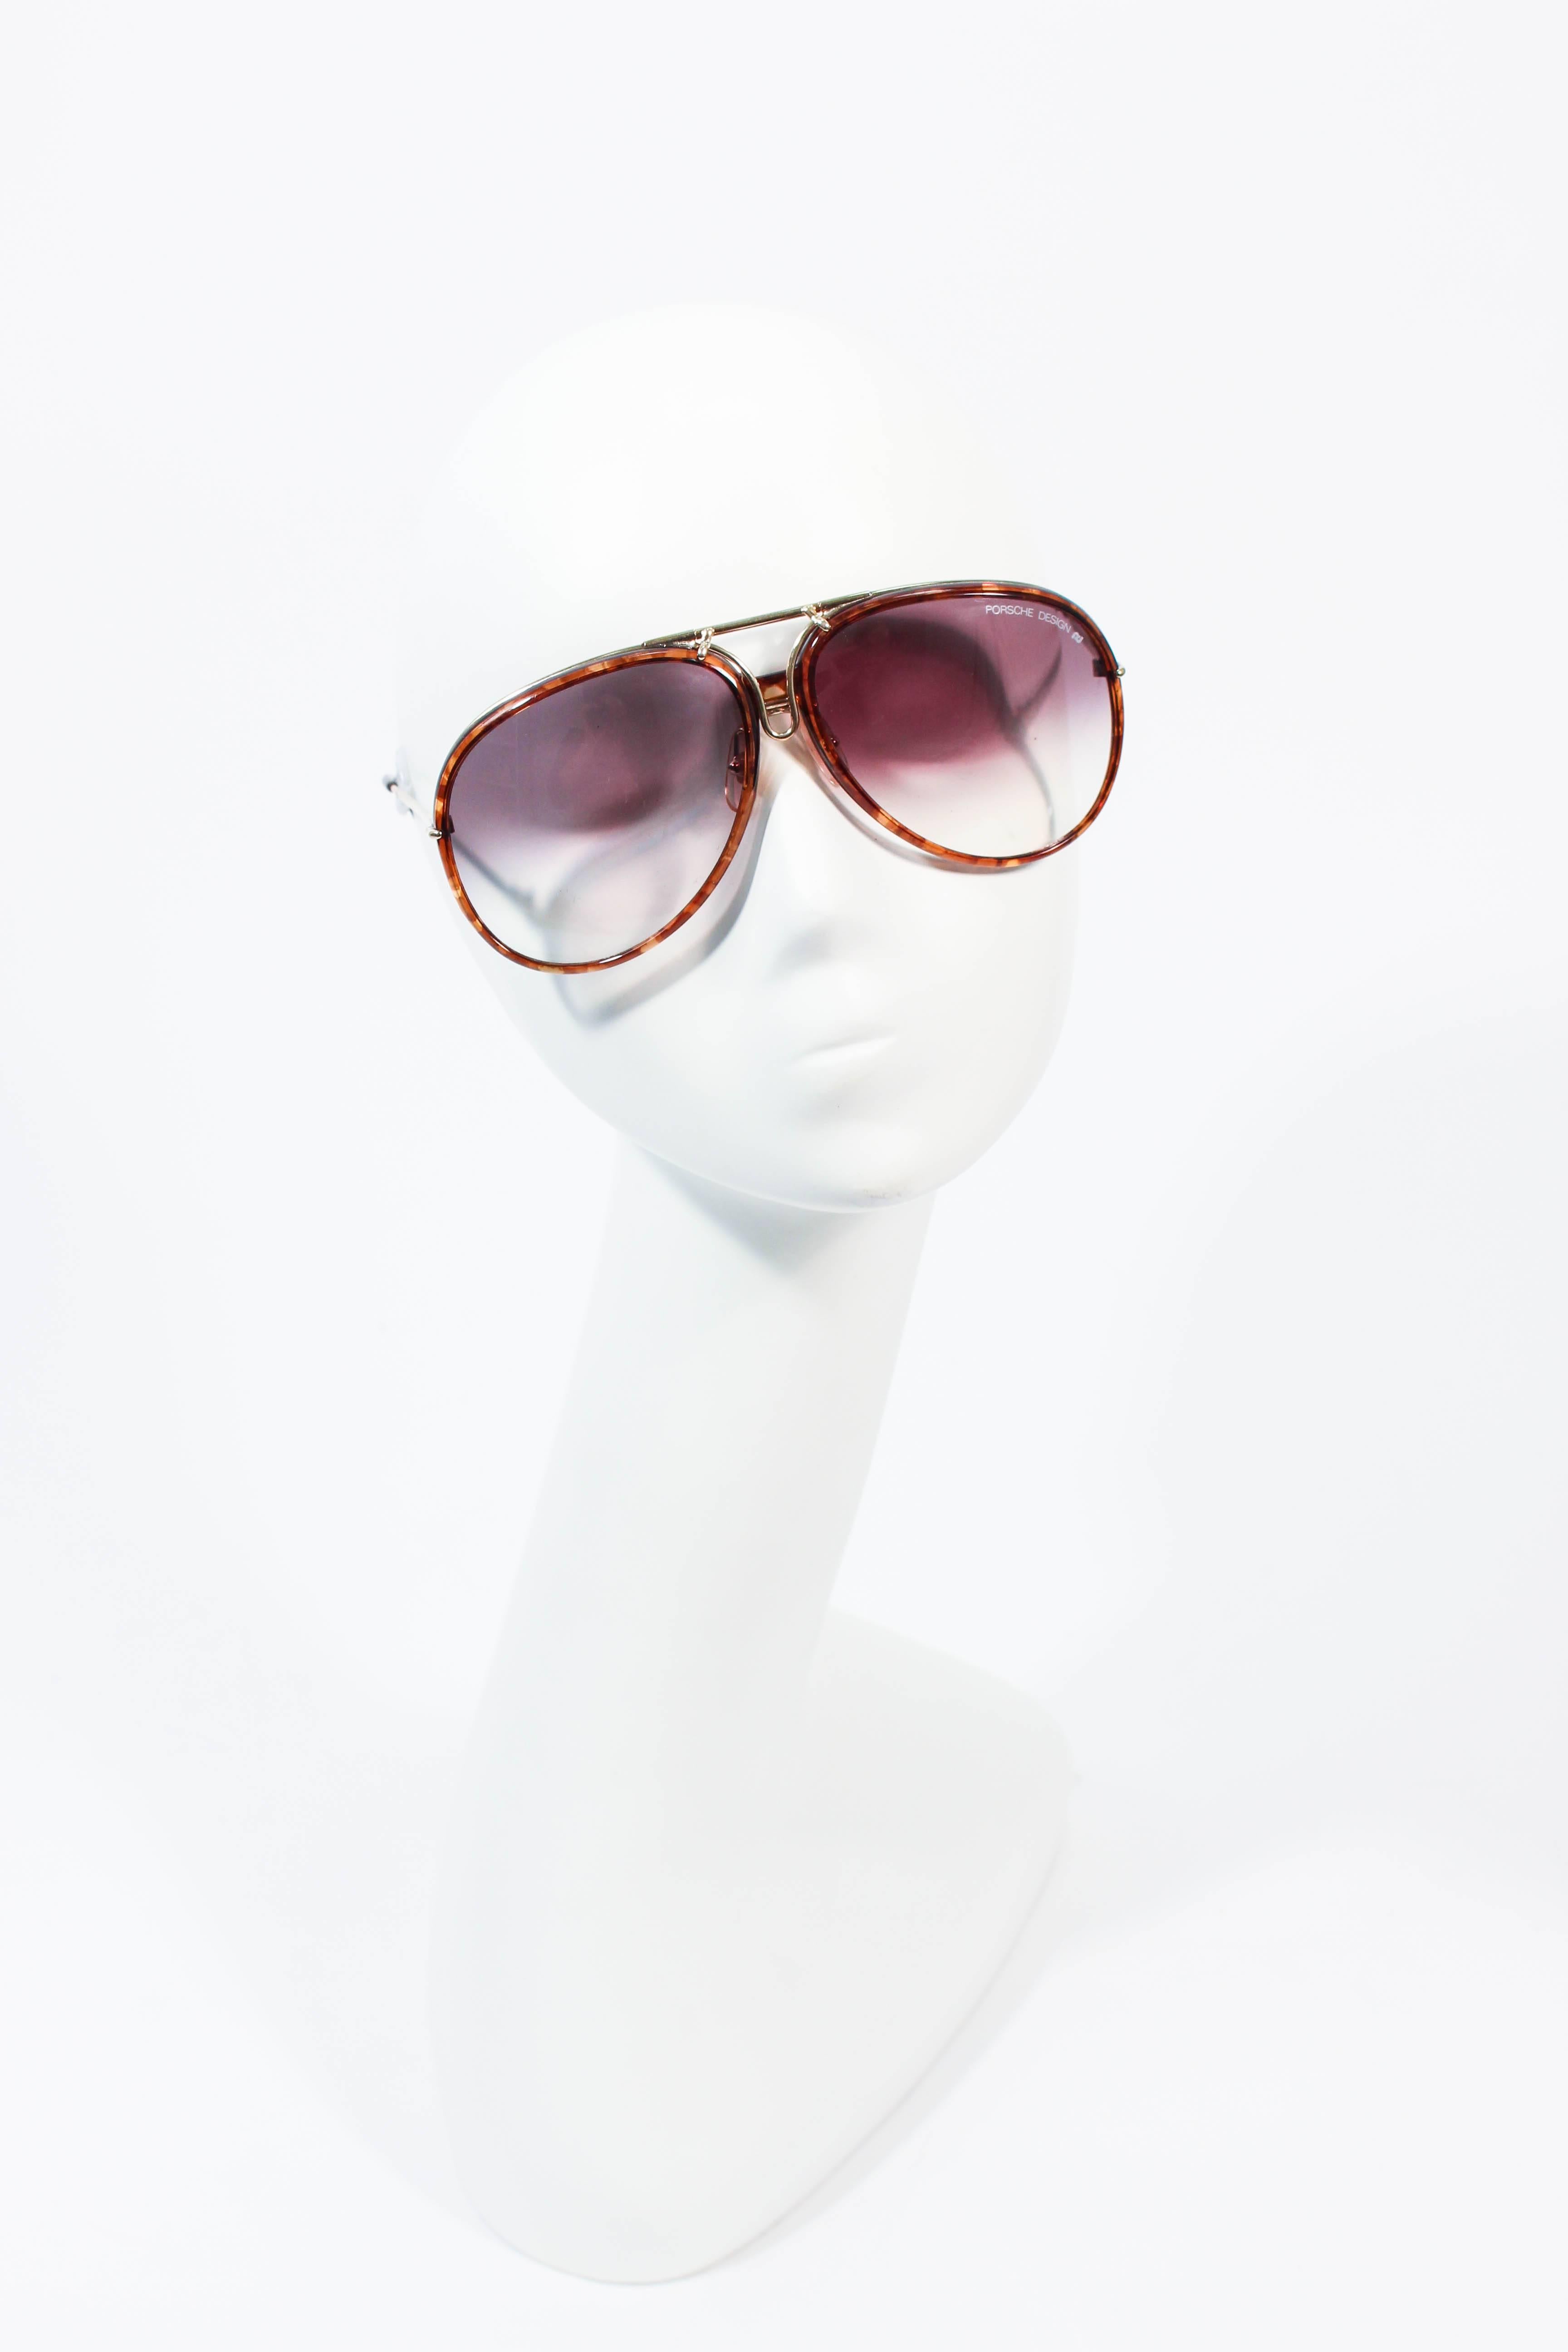 These Porsche Carrera sunglasses are composed of gold tone metal with a interchangeable brown frame. In great vintage condition, lenses are in great condition. Comes with grey case.

**Please cross-reference measurements for personal accuracy. Size